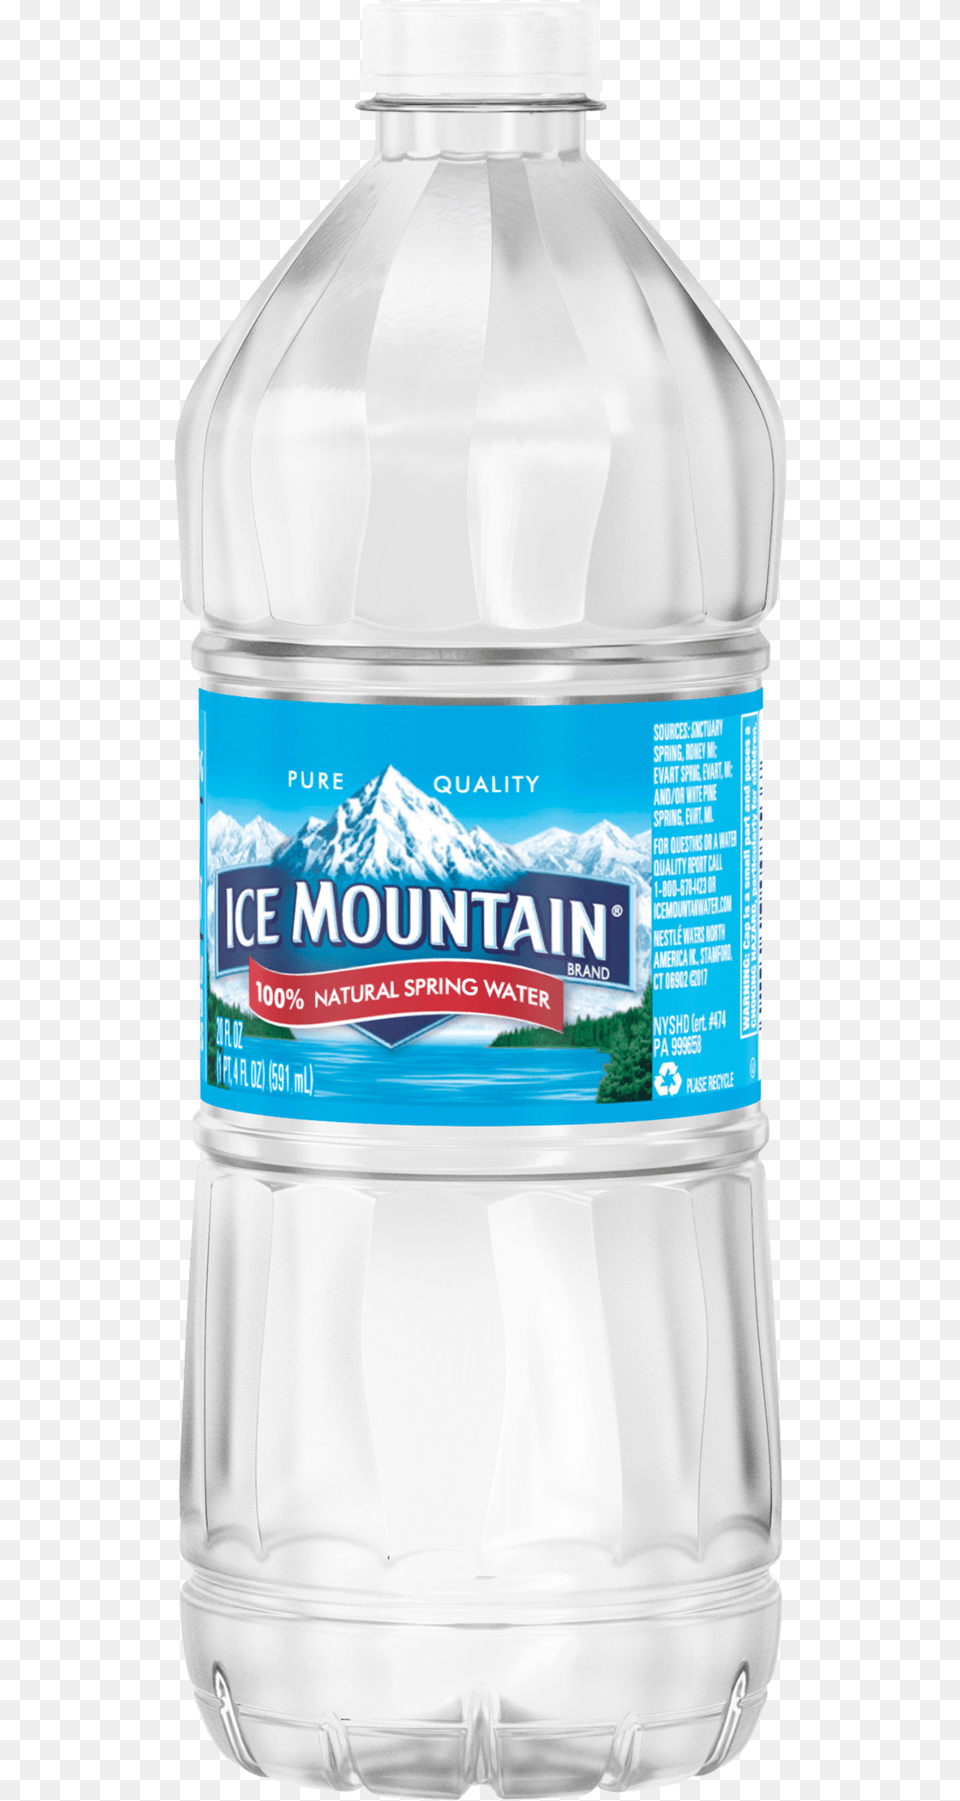 Ice Mountain Water, Beverage, Bottle, Mineral Water, Water Bottle Png Image